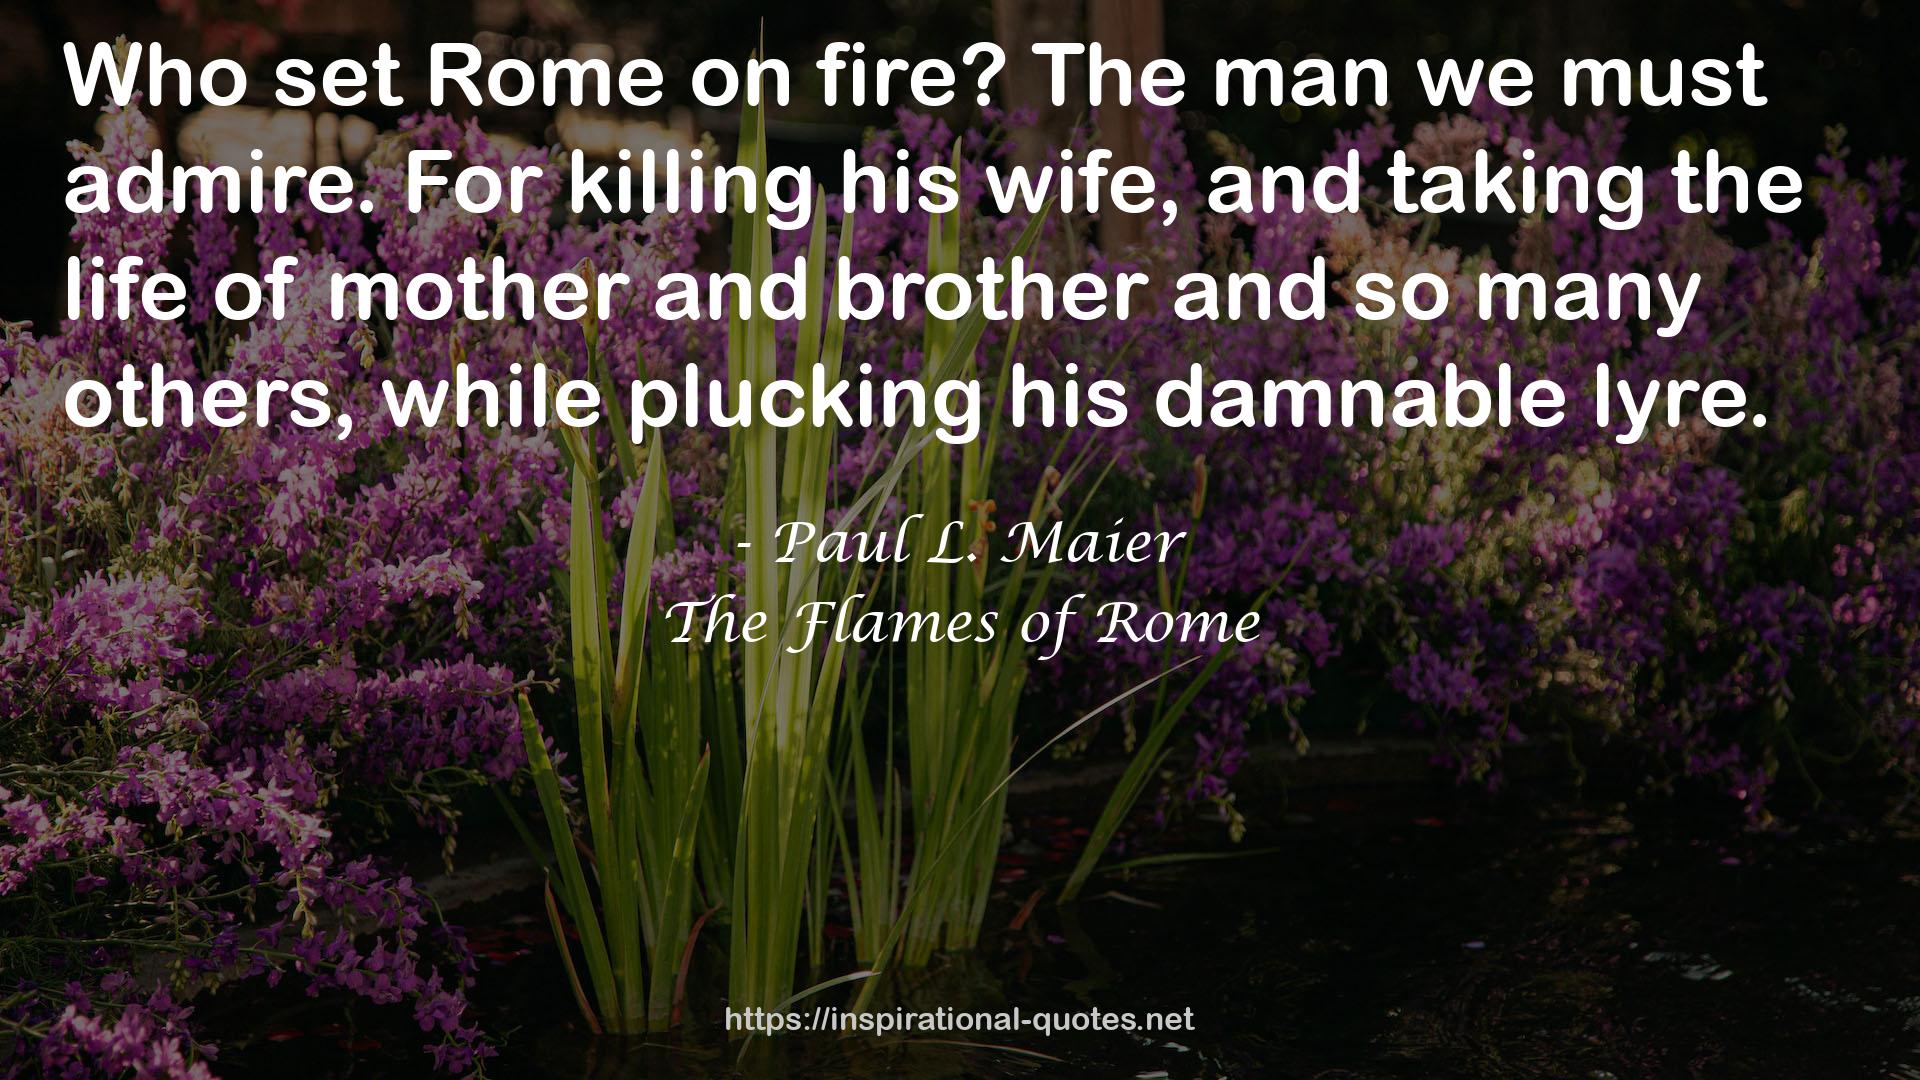 The Flames of Rome QUOTES